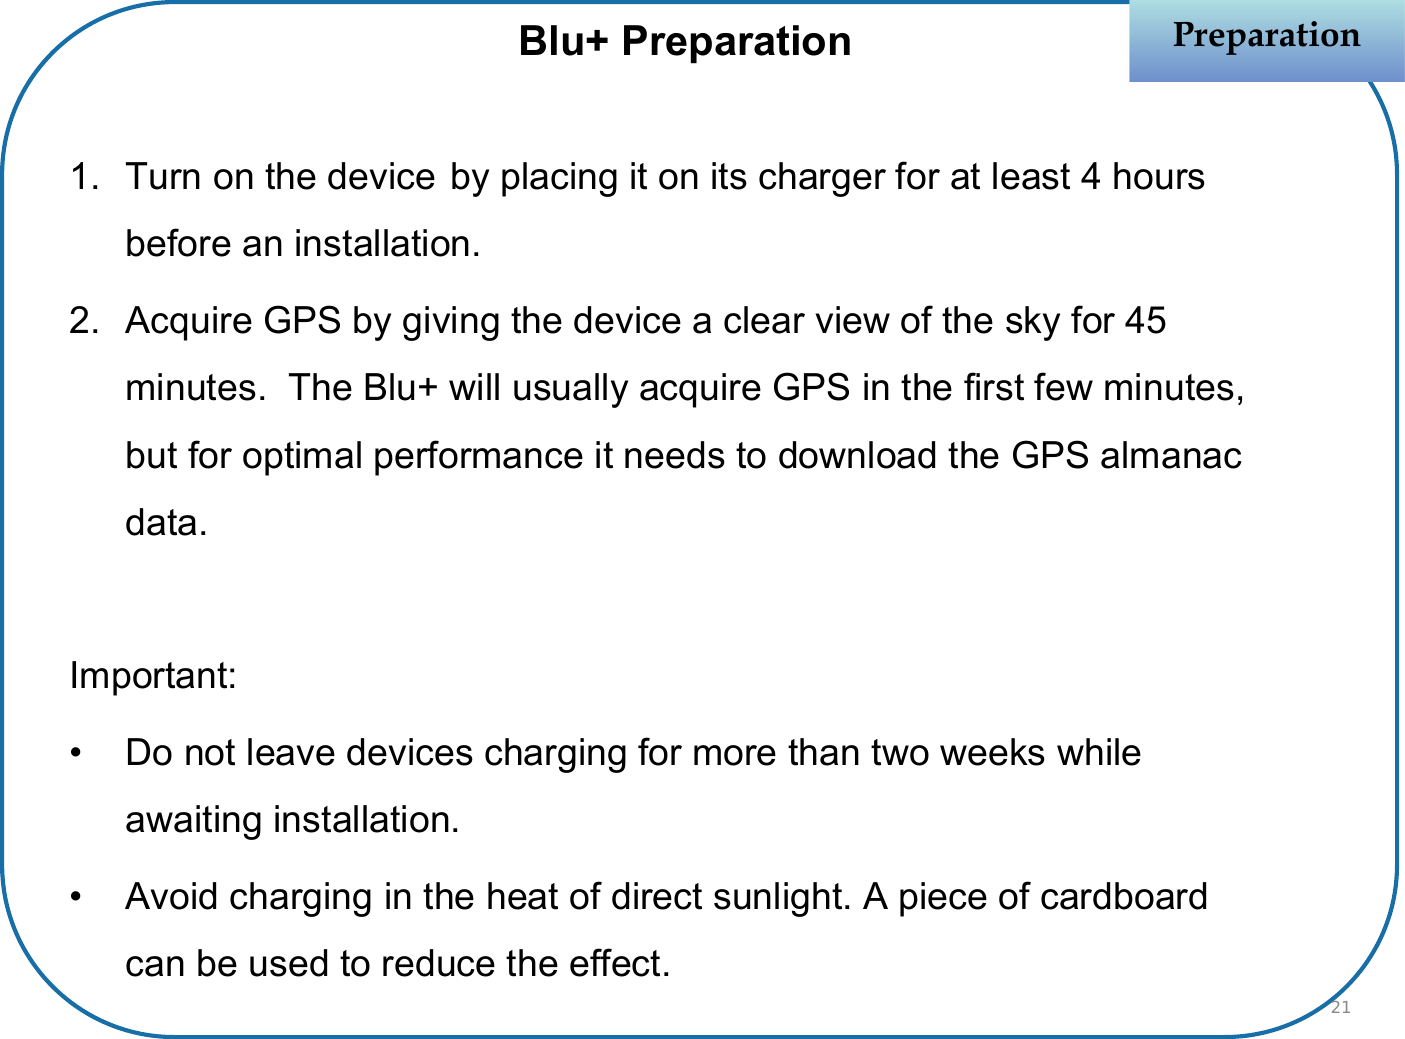 PreparationPreparation1. Turn on the device by placing it on its charger for at least 4 hours before an installation.2. Acquire GPS by giving the device a clear view of the sky for 45 minutes.  The Blu+ will usually acquire GPS in the first few minutes, but for optimal performance it needs to download the GPS almanac data.Important:• Do not leave devices charging for more than two weeks while awaiting installation.• Avoid charging in the heat of direct sunlight. A piece of cardboard can be used to reduce the effect.Blu+ Preparation21